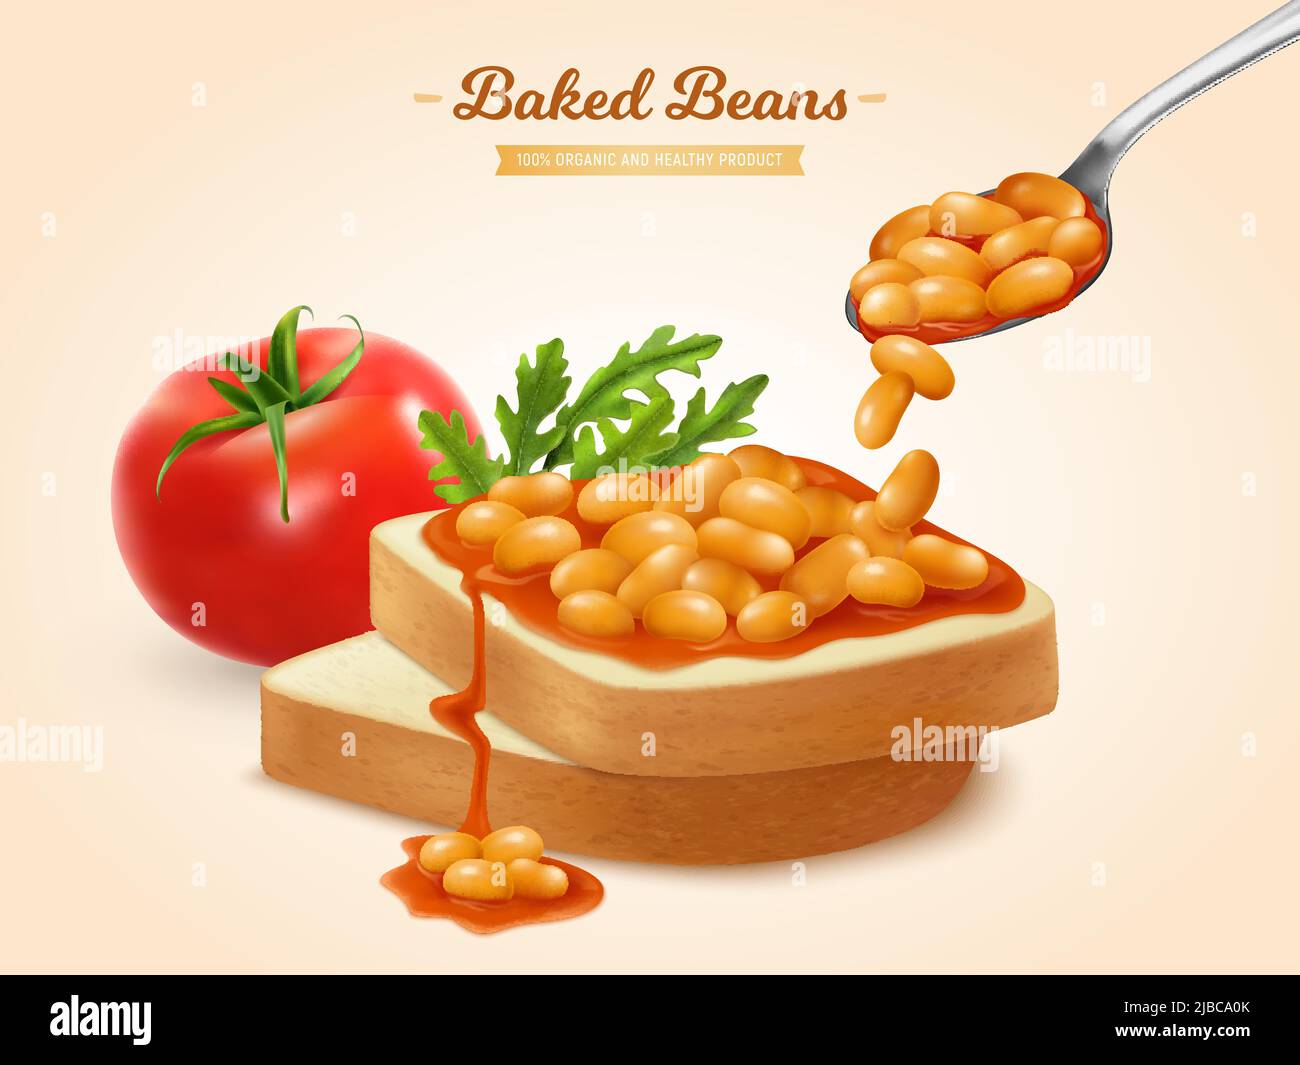 Backed beans in tomato sauce on bread slices realistic advertising composition with arugula sandwich isometric vector illustration Stock Vector